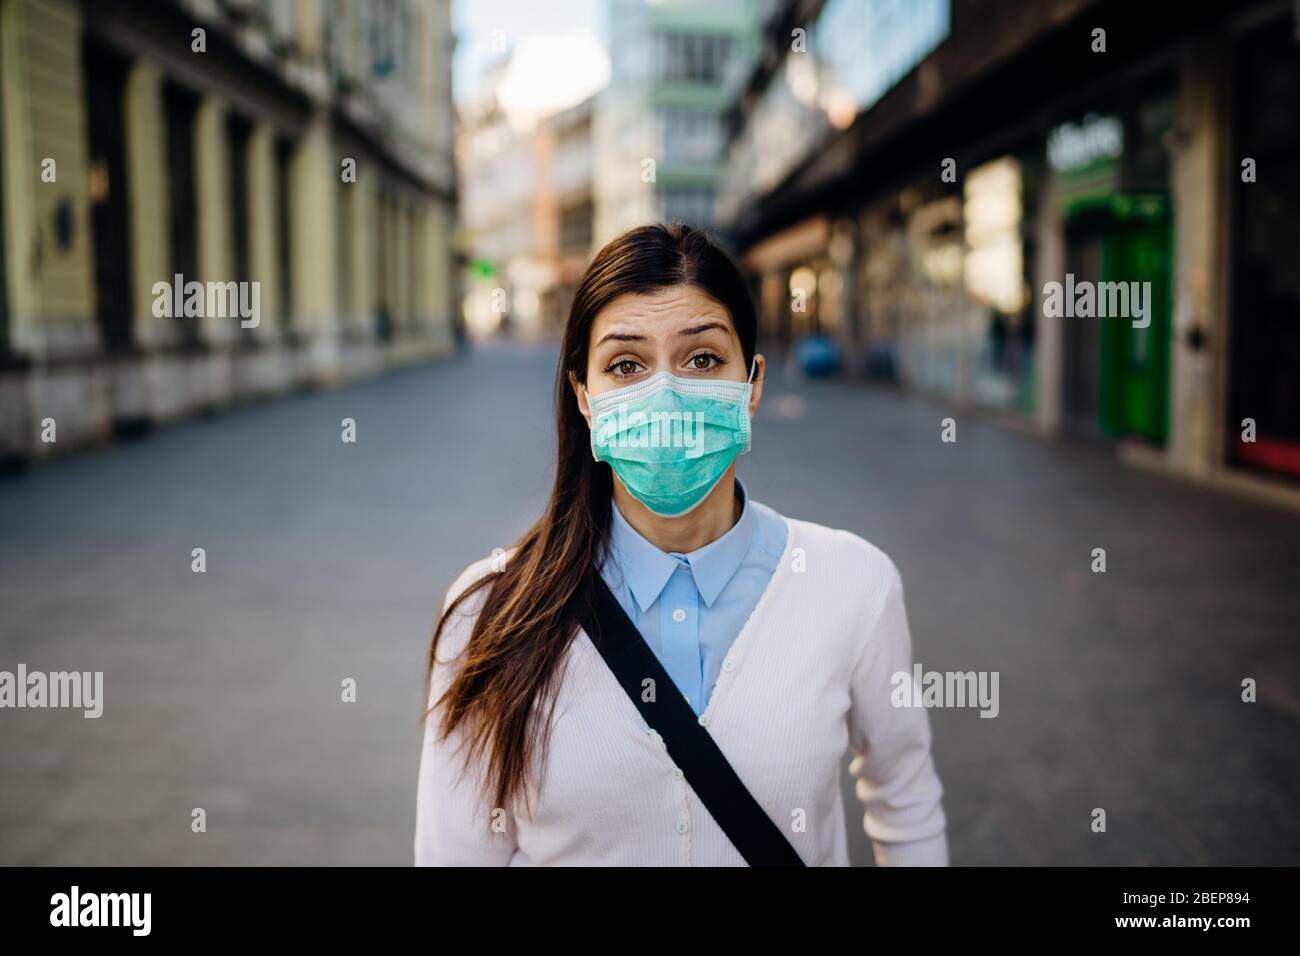 Anxious young adult affected by the COVID-19.Walking,going to work during pandemic.Protective measures,mask wearing and social distancing.Respecting g Stock Photo